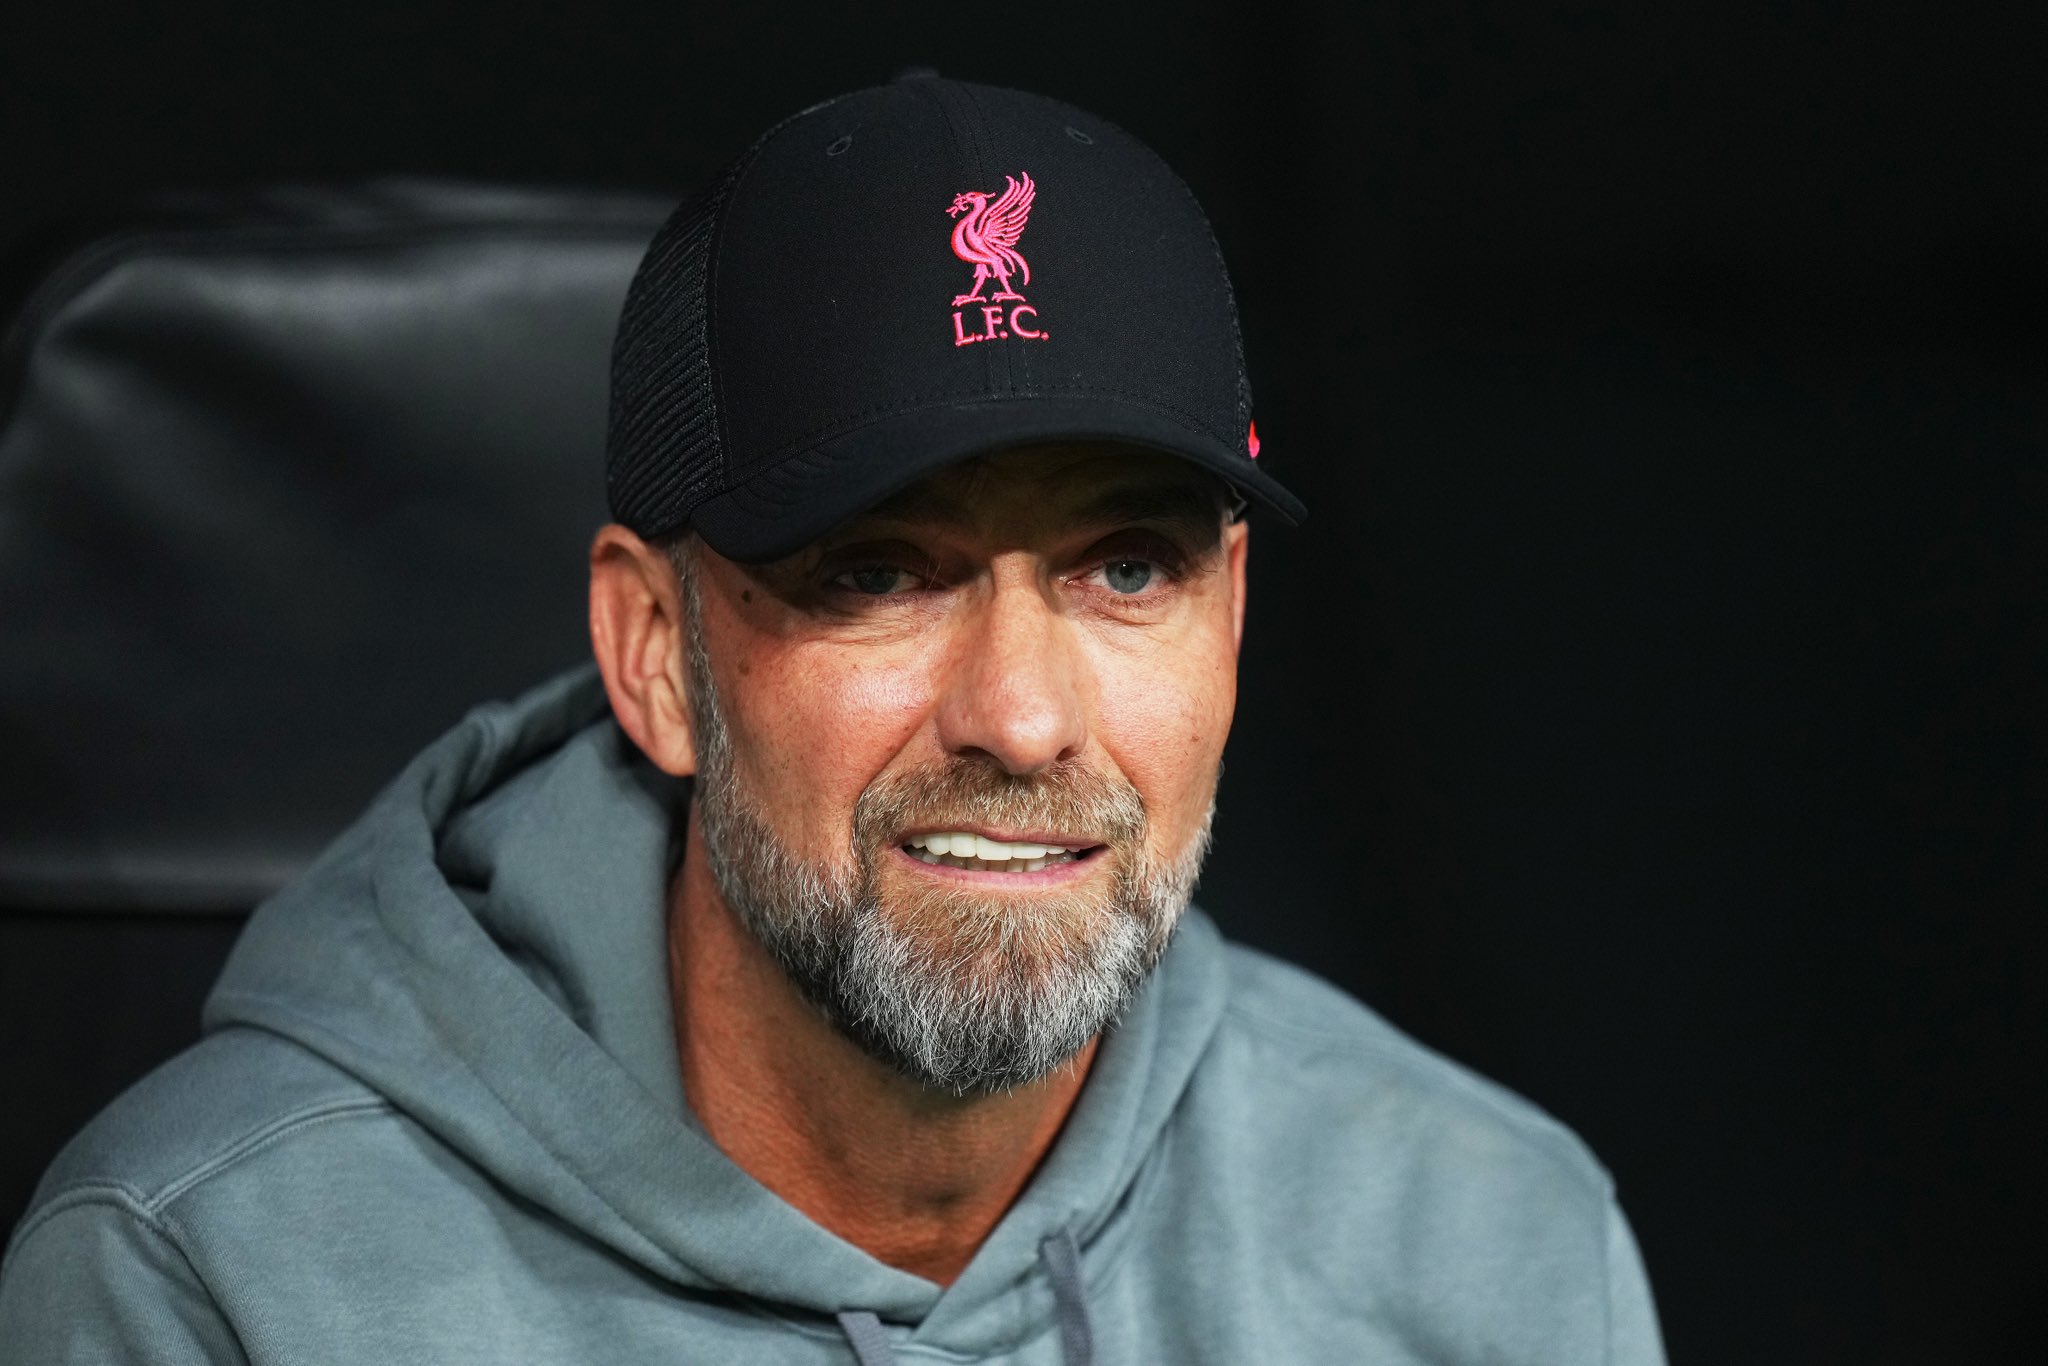 Fabrizio Romano Twitter: "Liverpool are working on two more new midfielders after Mac Allister but there's also clear intention to sign a new centre back this summer. 🔴 #LFC Klopp and